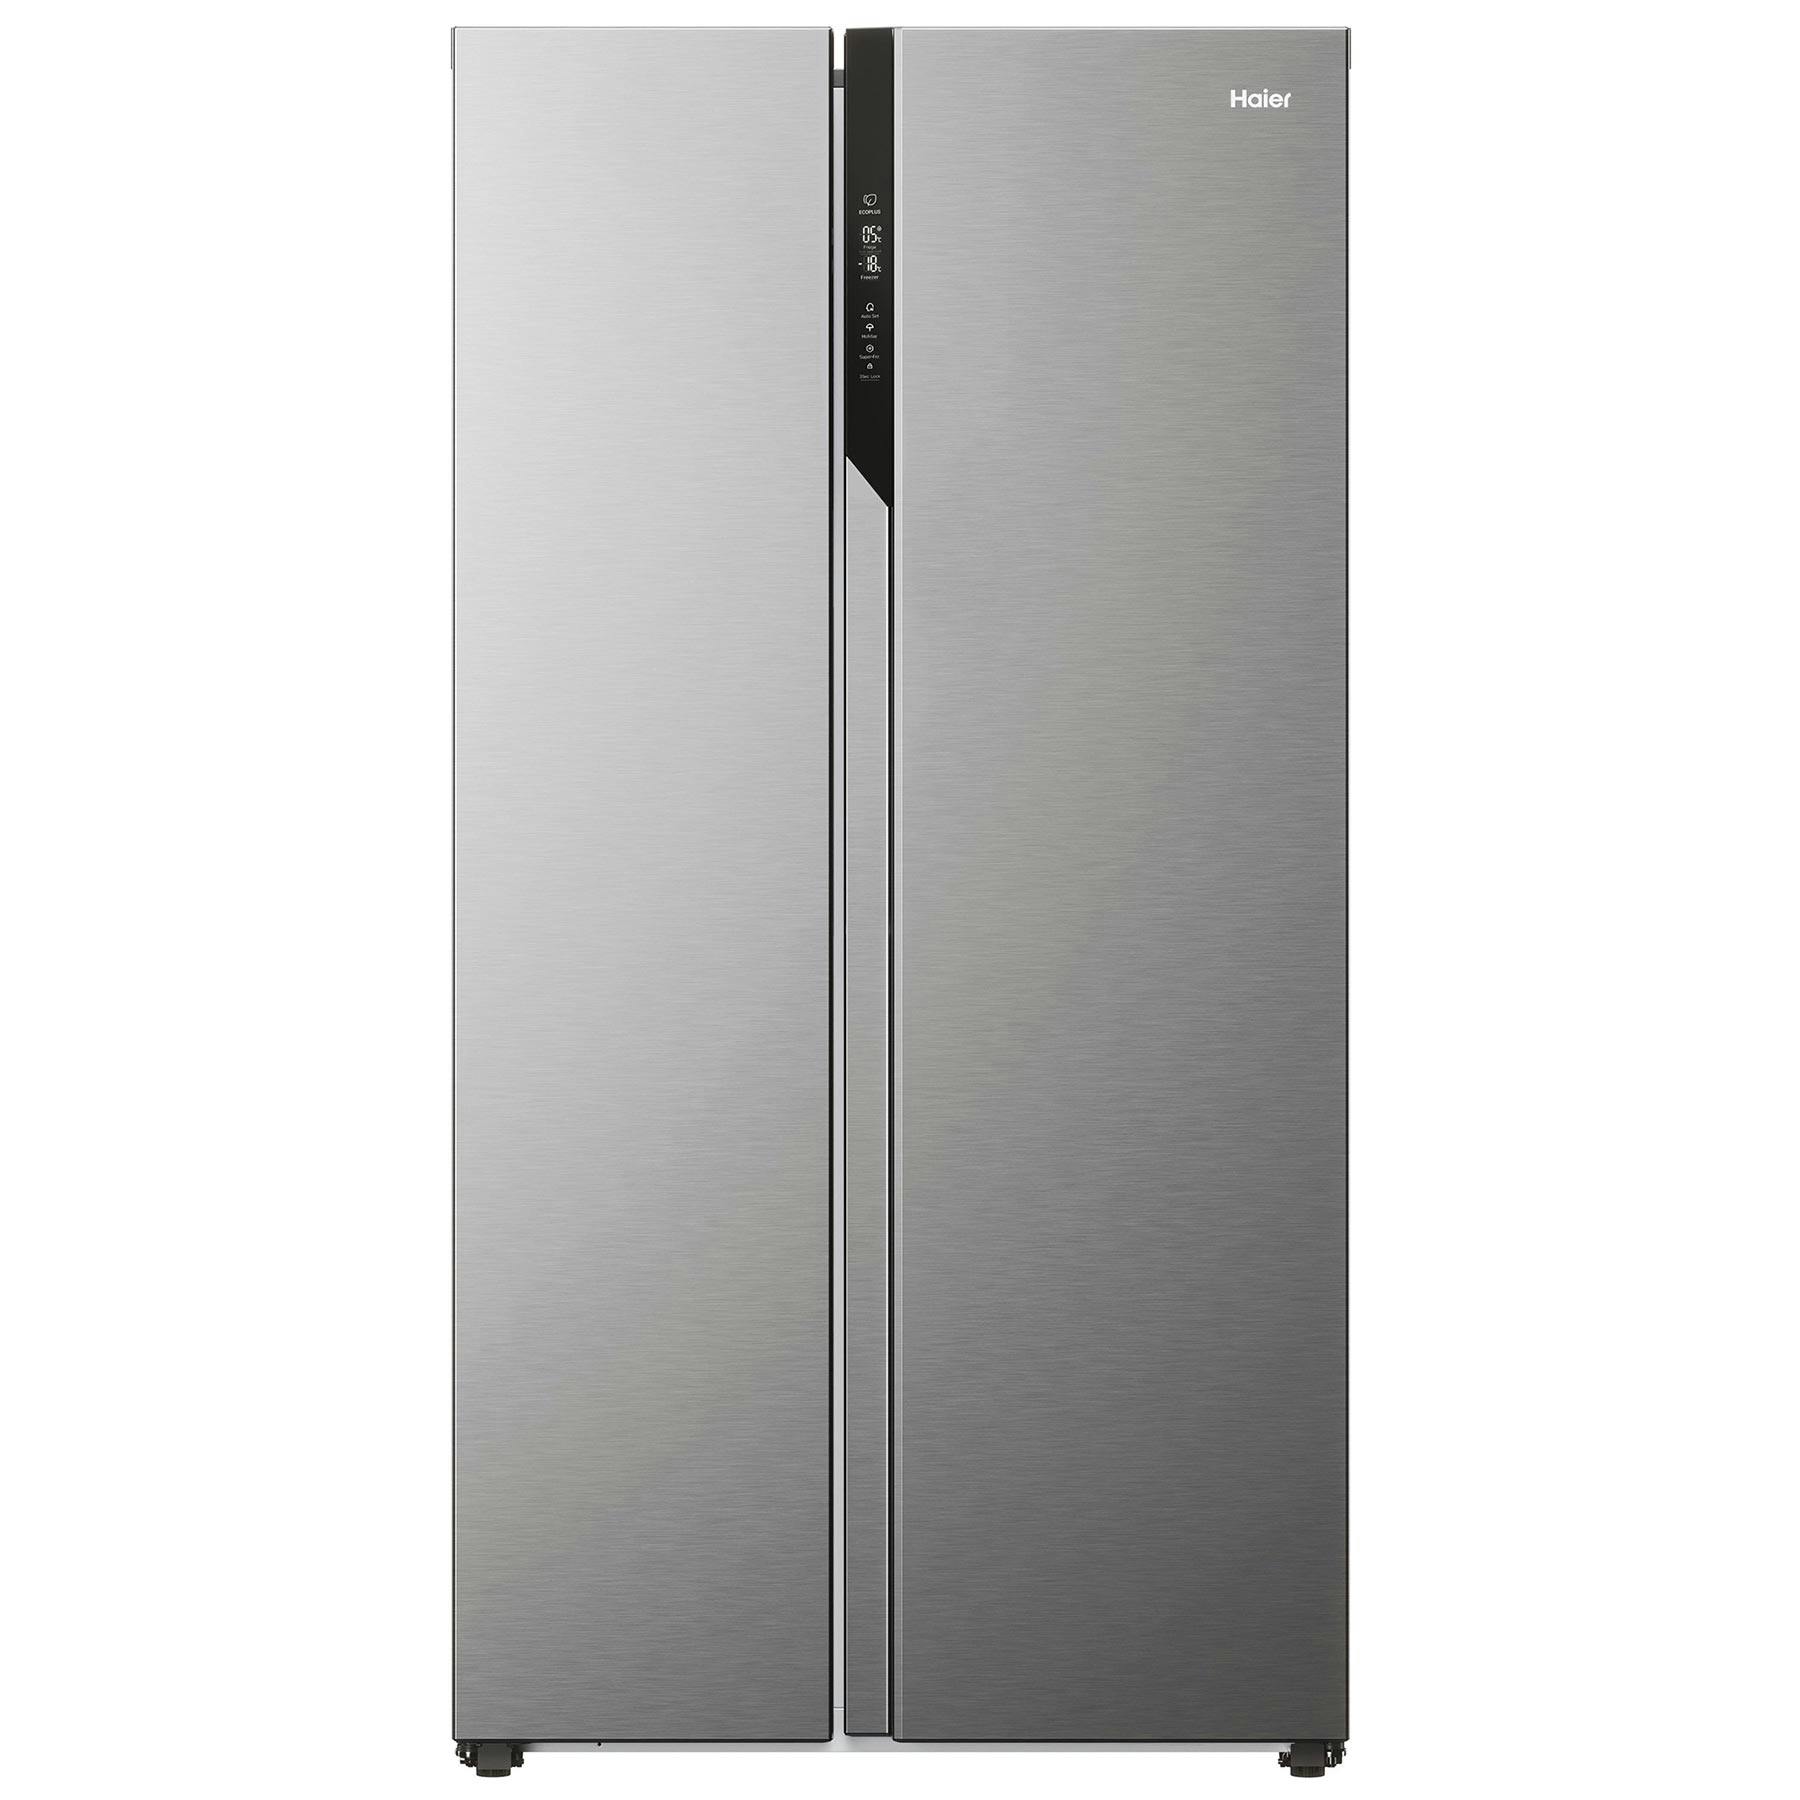 Why Do Fridge Freezers Need Time To Settle?